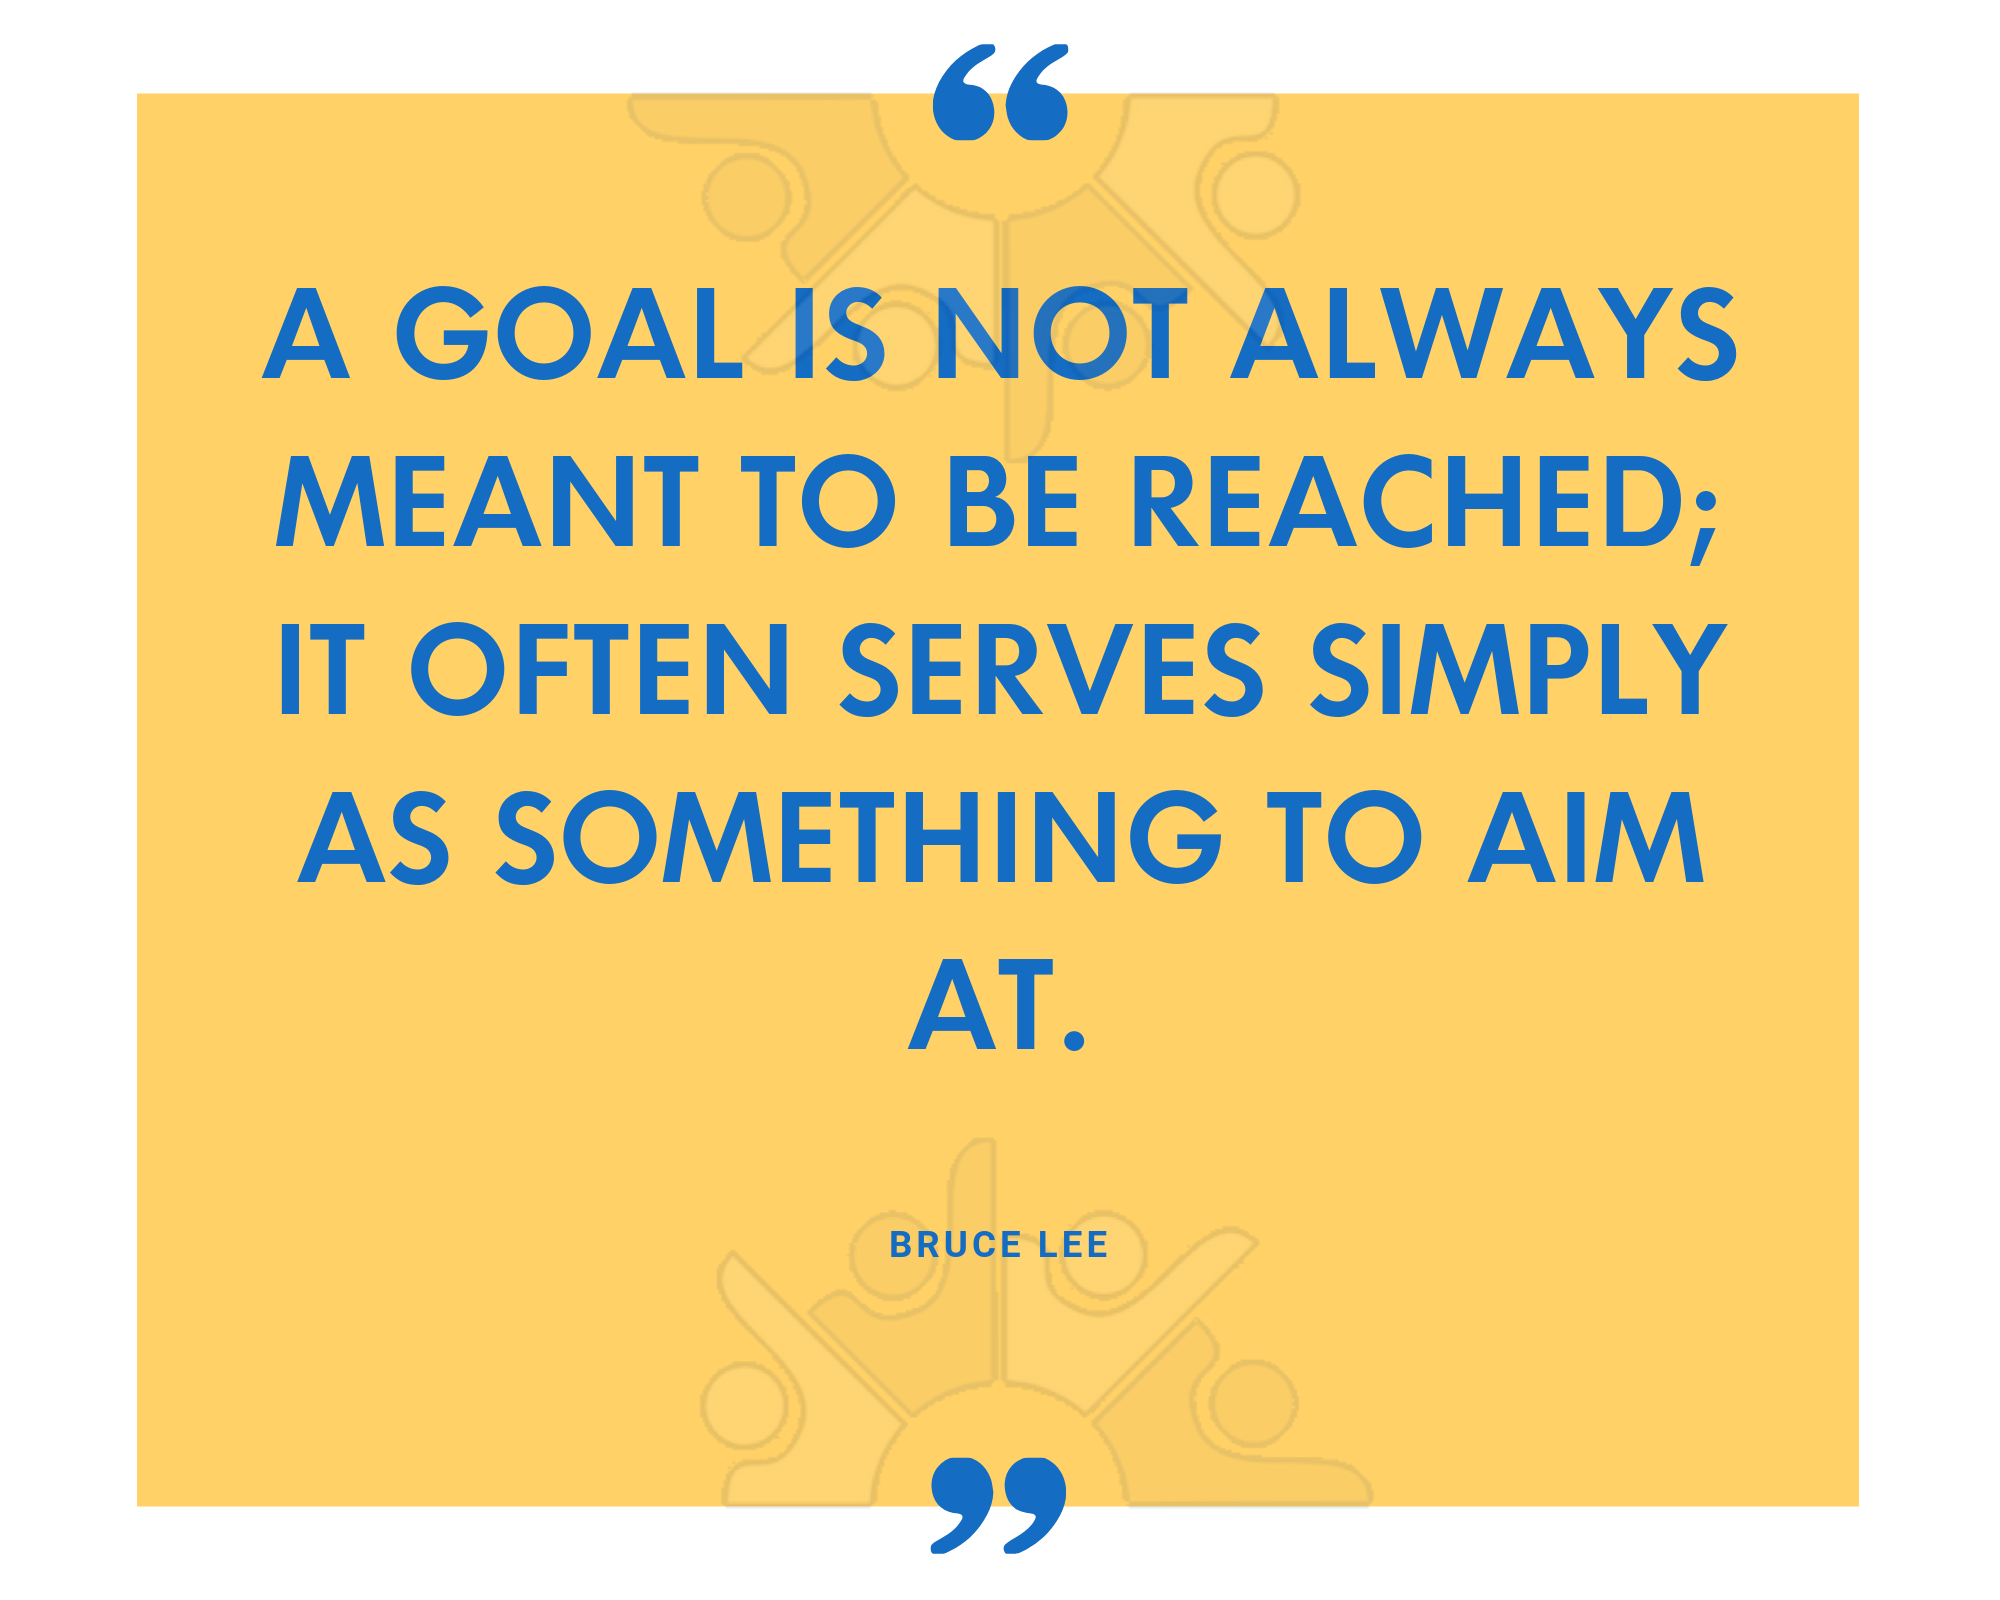 A goal is not always meant to be reached; it often serves simply as something to aim at.